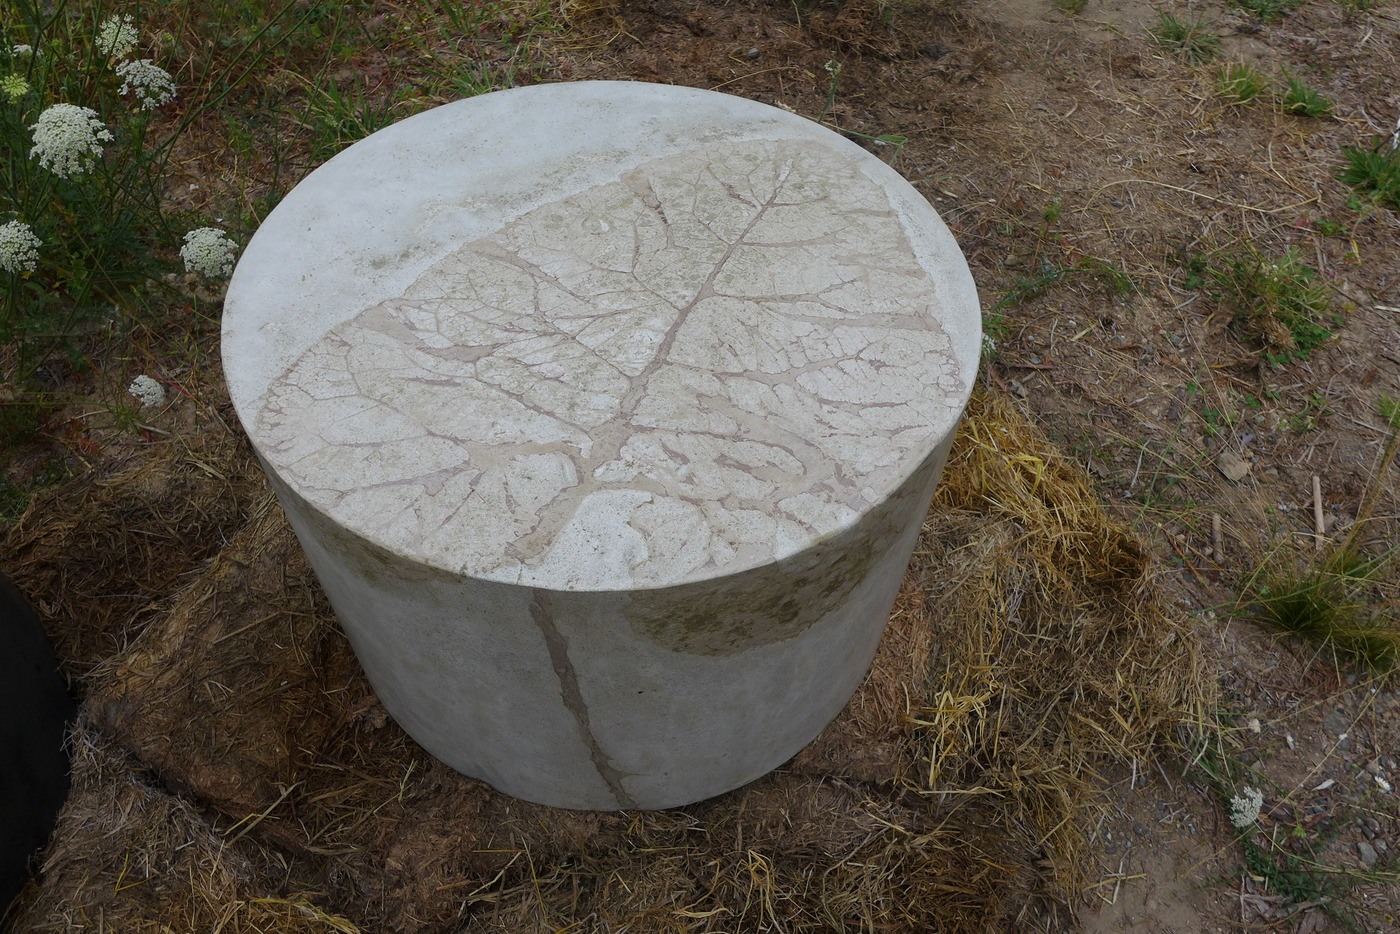 Concrete COffee Table with leaf impression